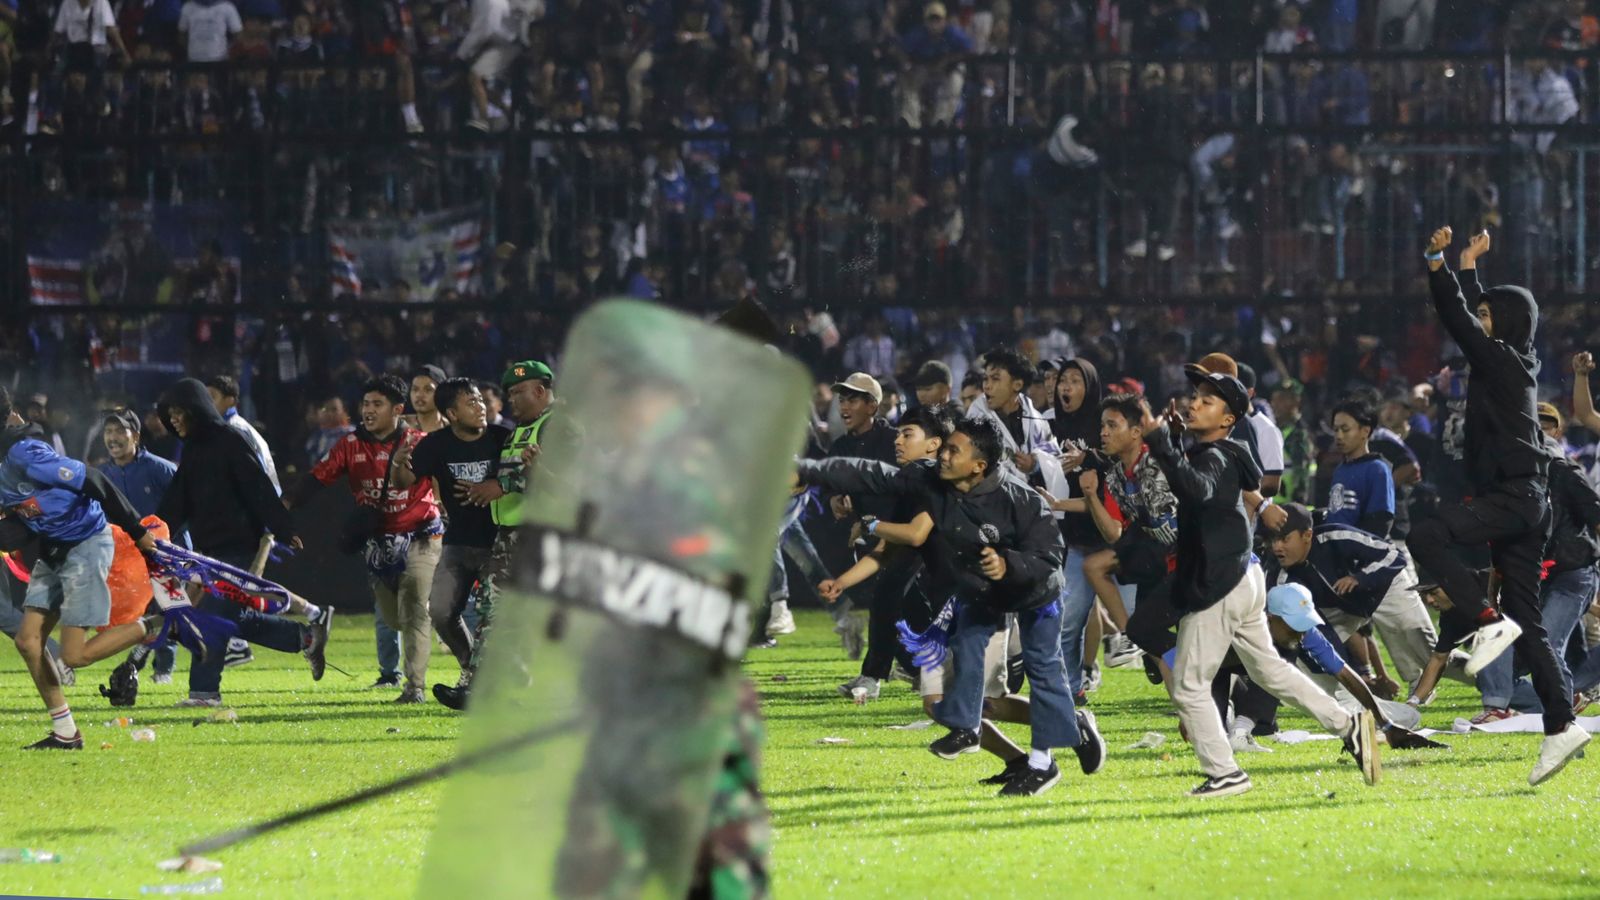 Indonesia: At least 174 people killed after riot at football match | Football News